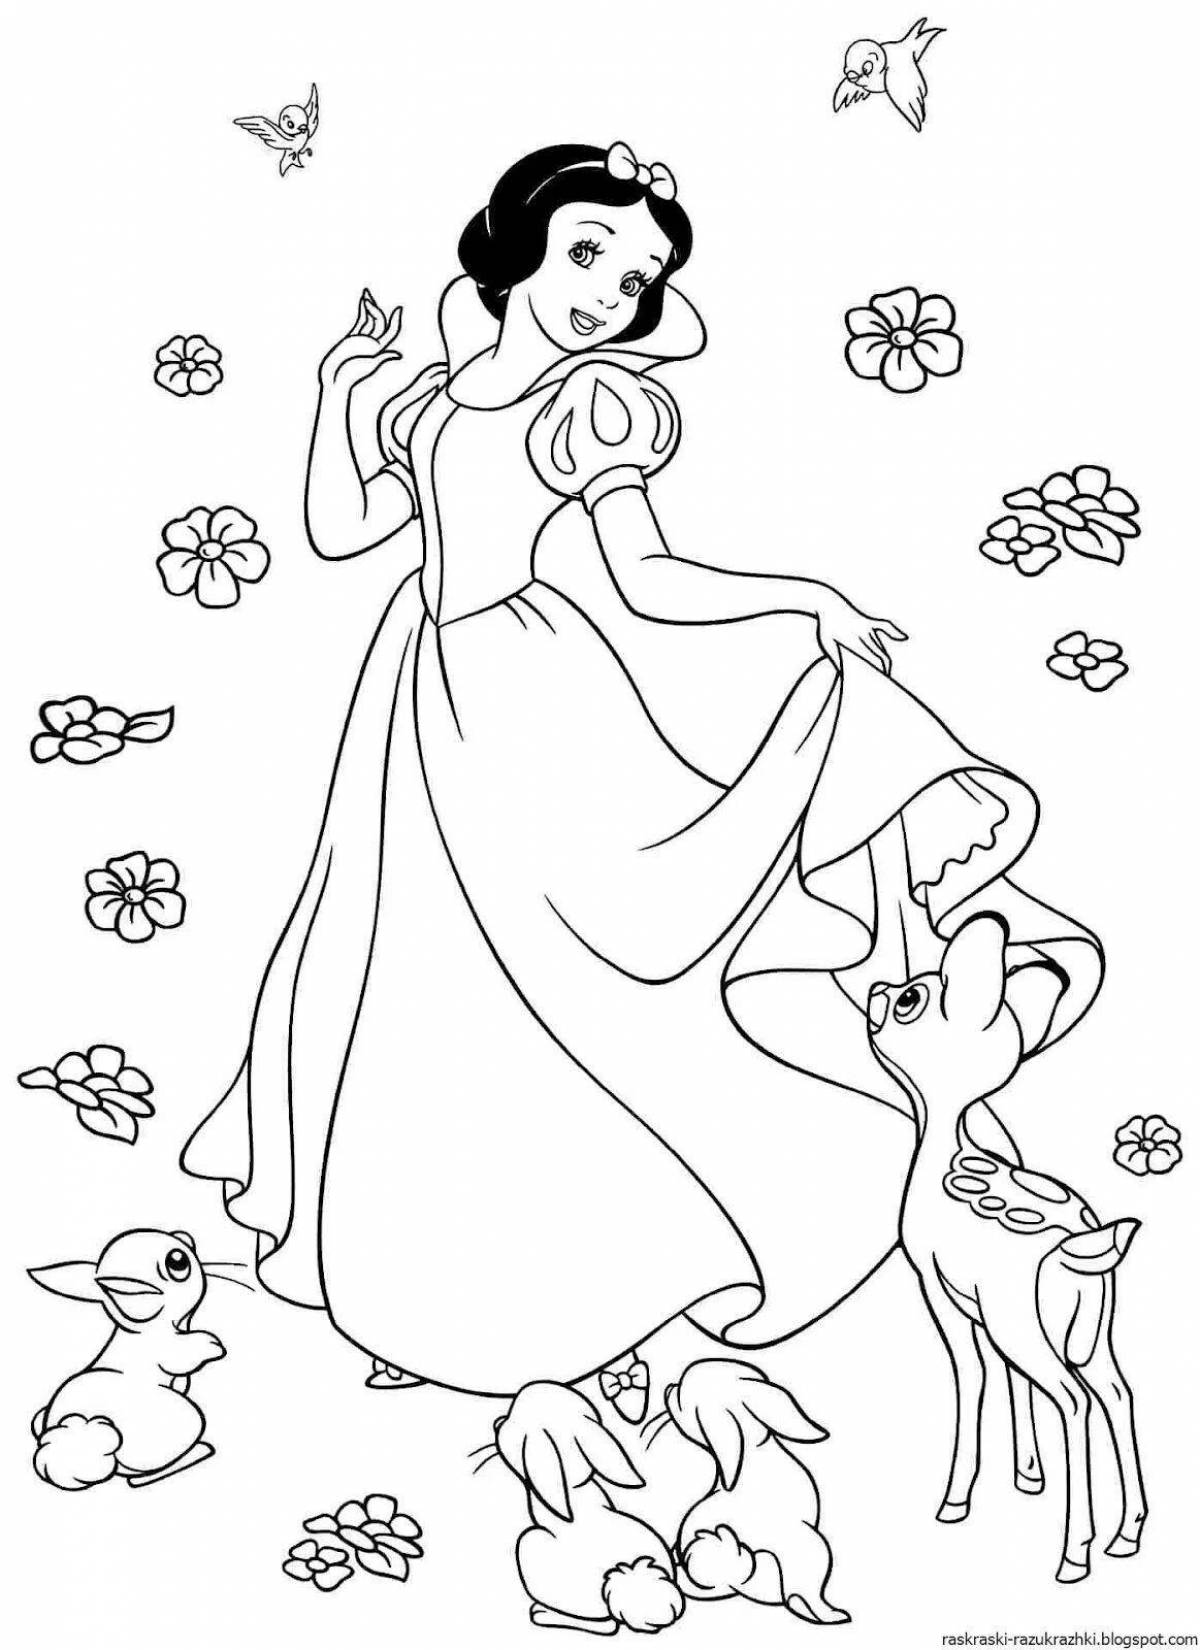 Large coloring book for girls princesses 5-6 years old